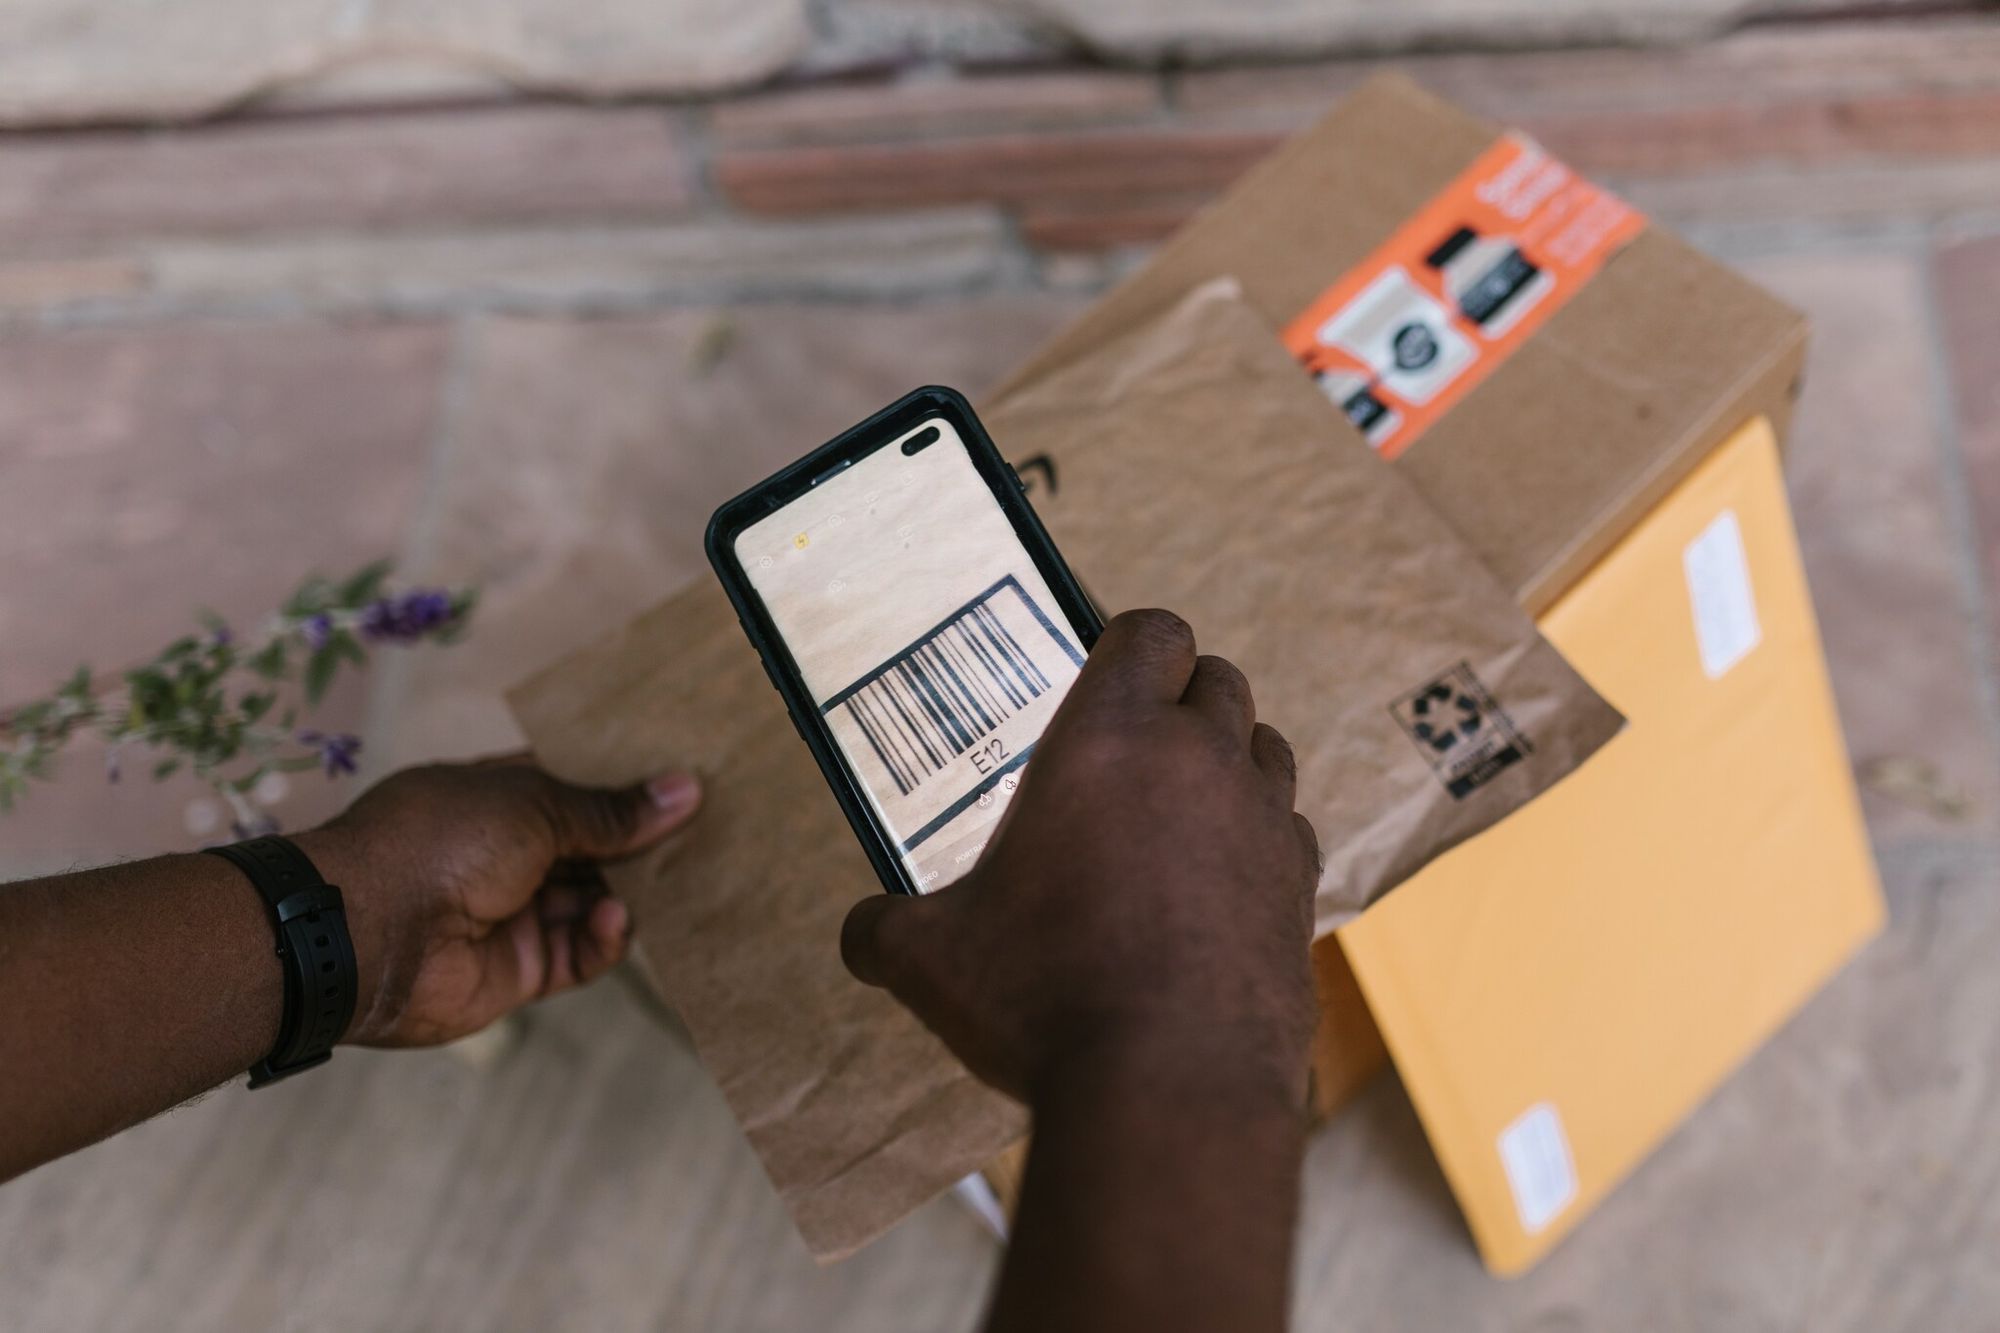 deliveryman scanning the barcode